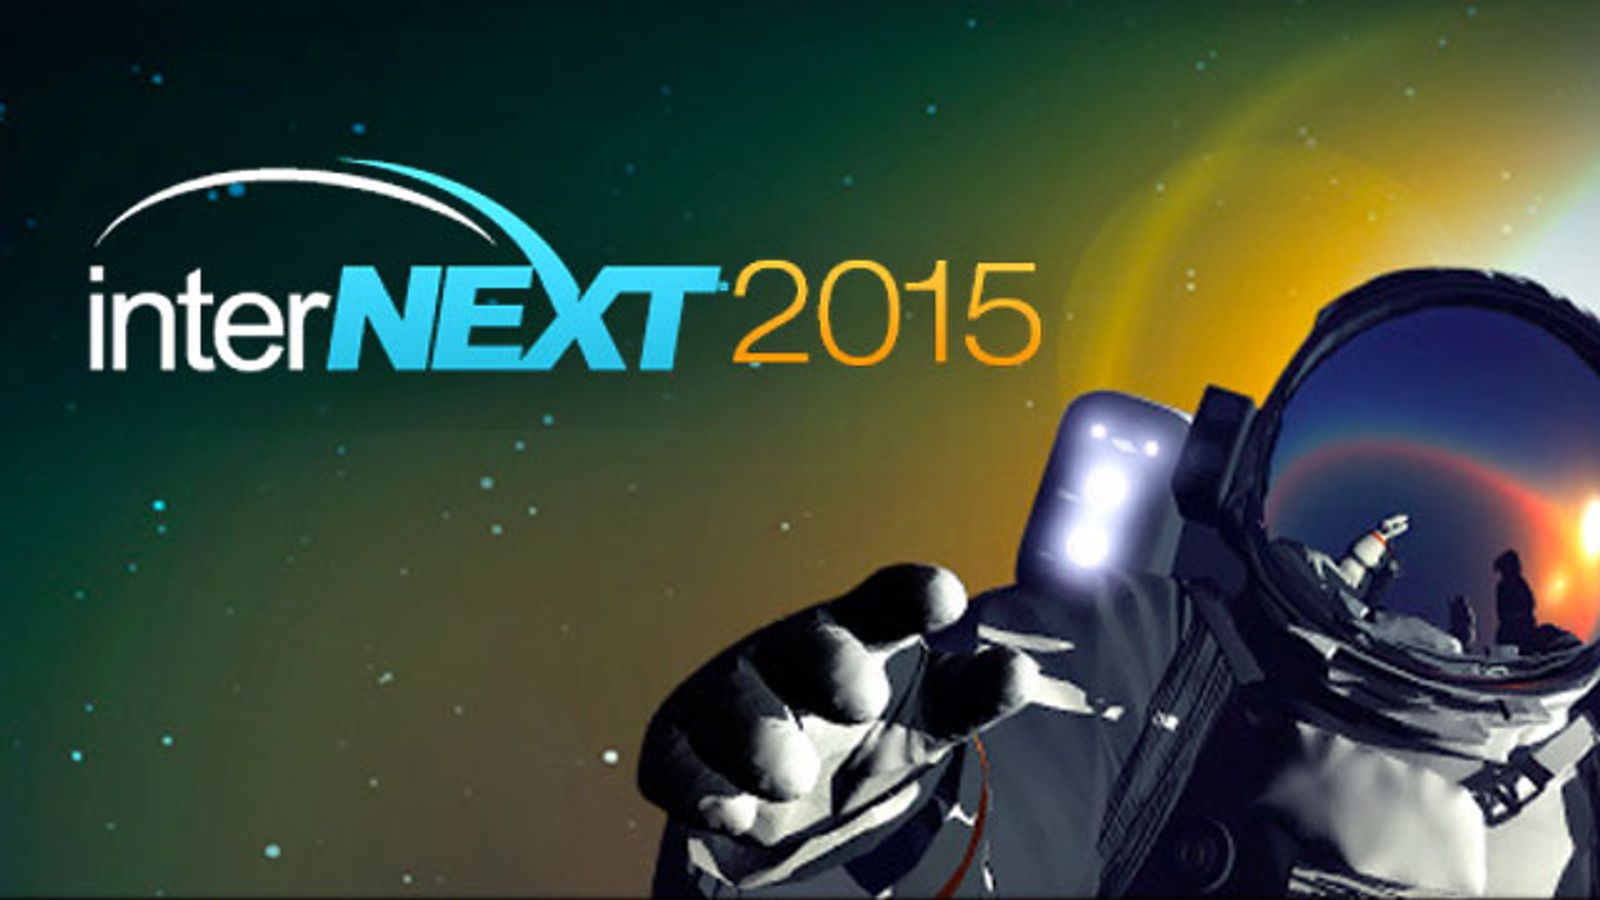 Details Released on Internext 2015 Educational Events & Schedule